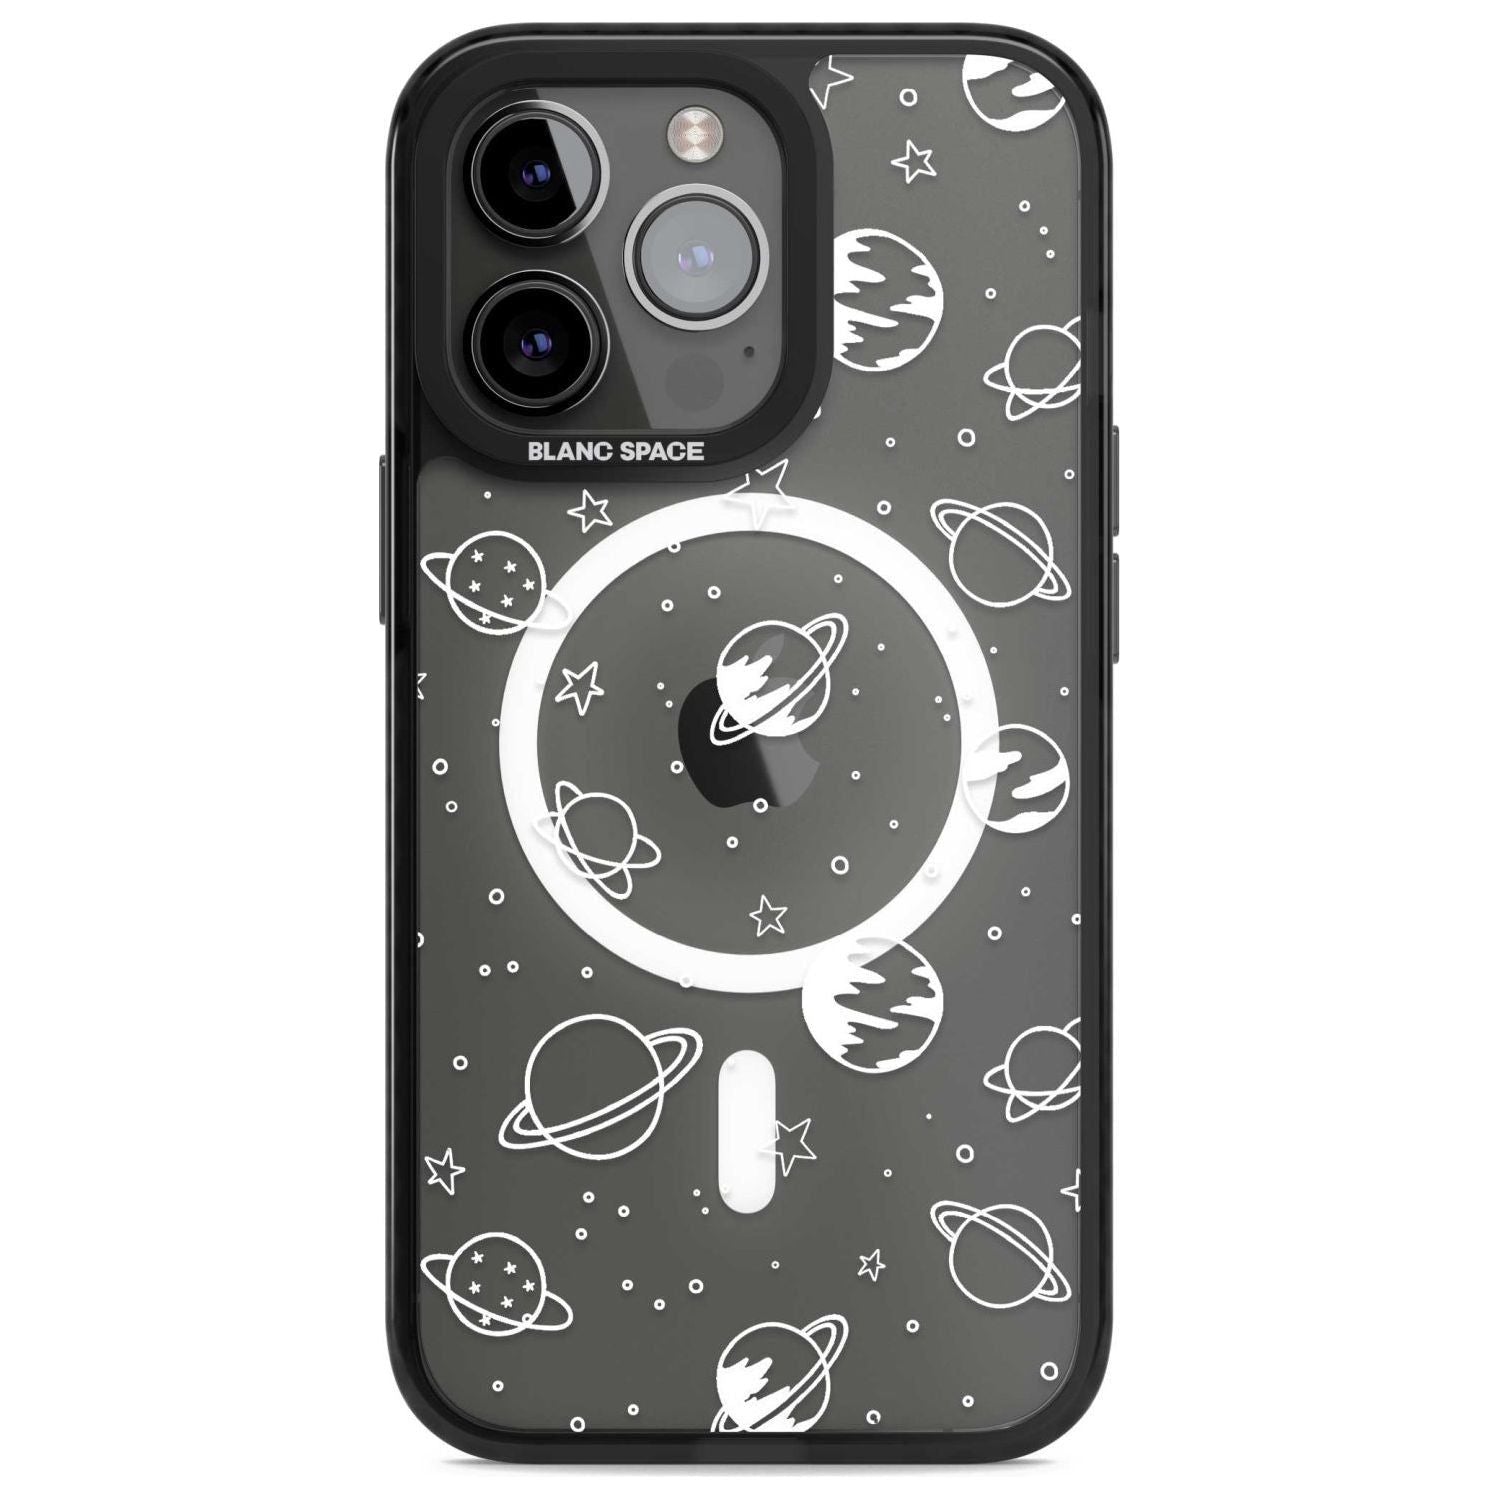 Cosmic Outer Space Design White on Clear Phone Case iPhone 15 Pro Max / Magsafe Black Impact Case,iPhone 15 Pro / Magsafe Black Impact Case,iPhone 14 Pro Max / Magsafe Black Impact Case,iPhone 14 Pro / Magsafe Black Impact Case,iPhone 13 Pro / Magsafe Black Impact Case Blanc Space